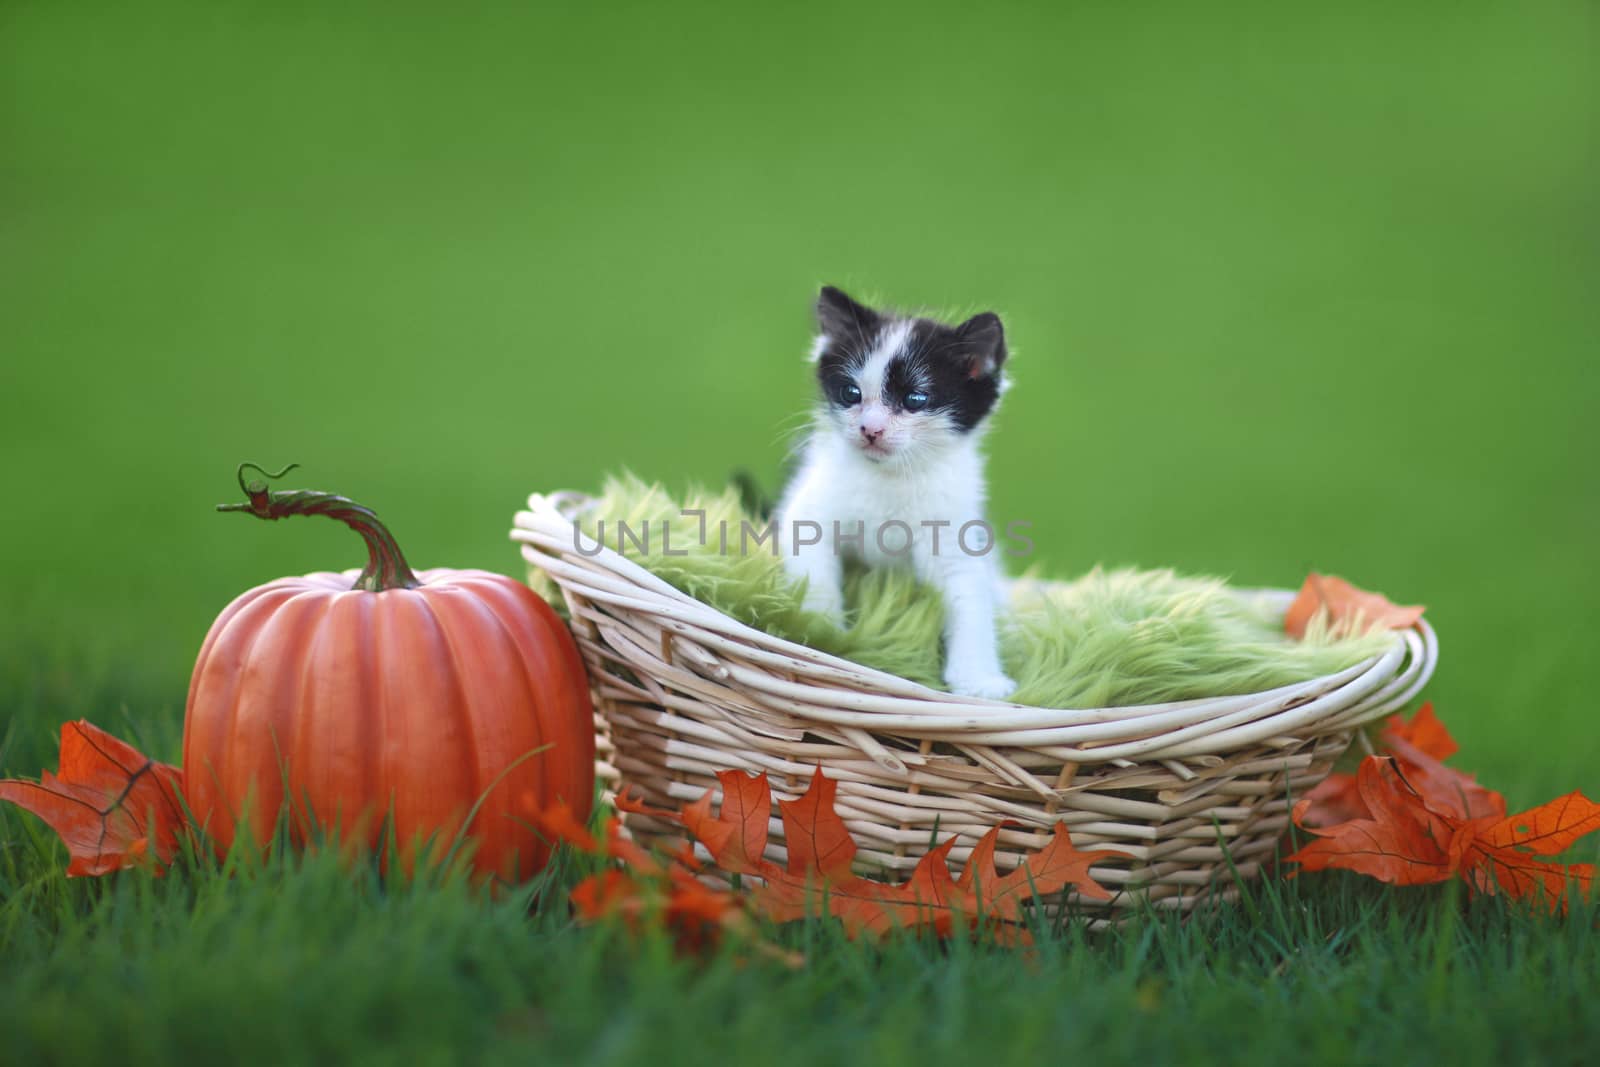 Adorable Baby Kitten Outdoors in Grass With Pumpkin